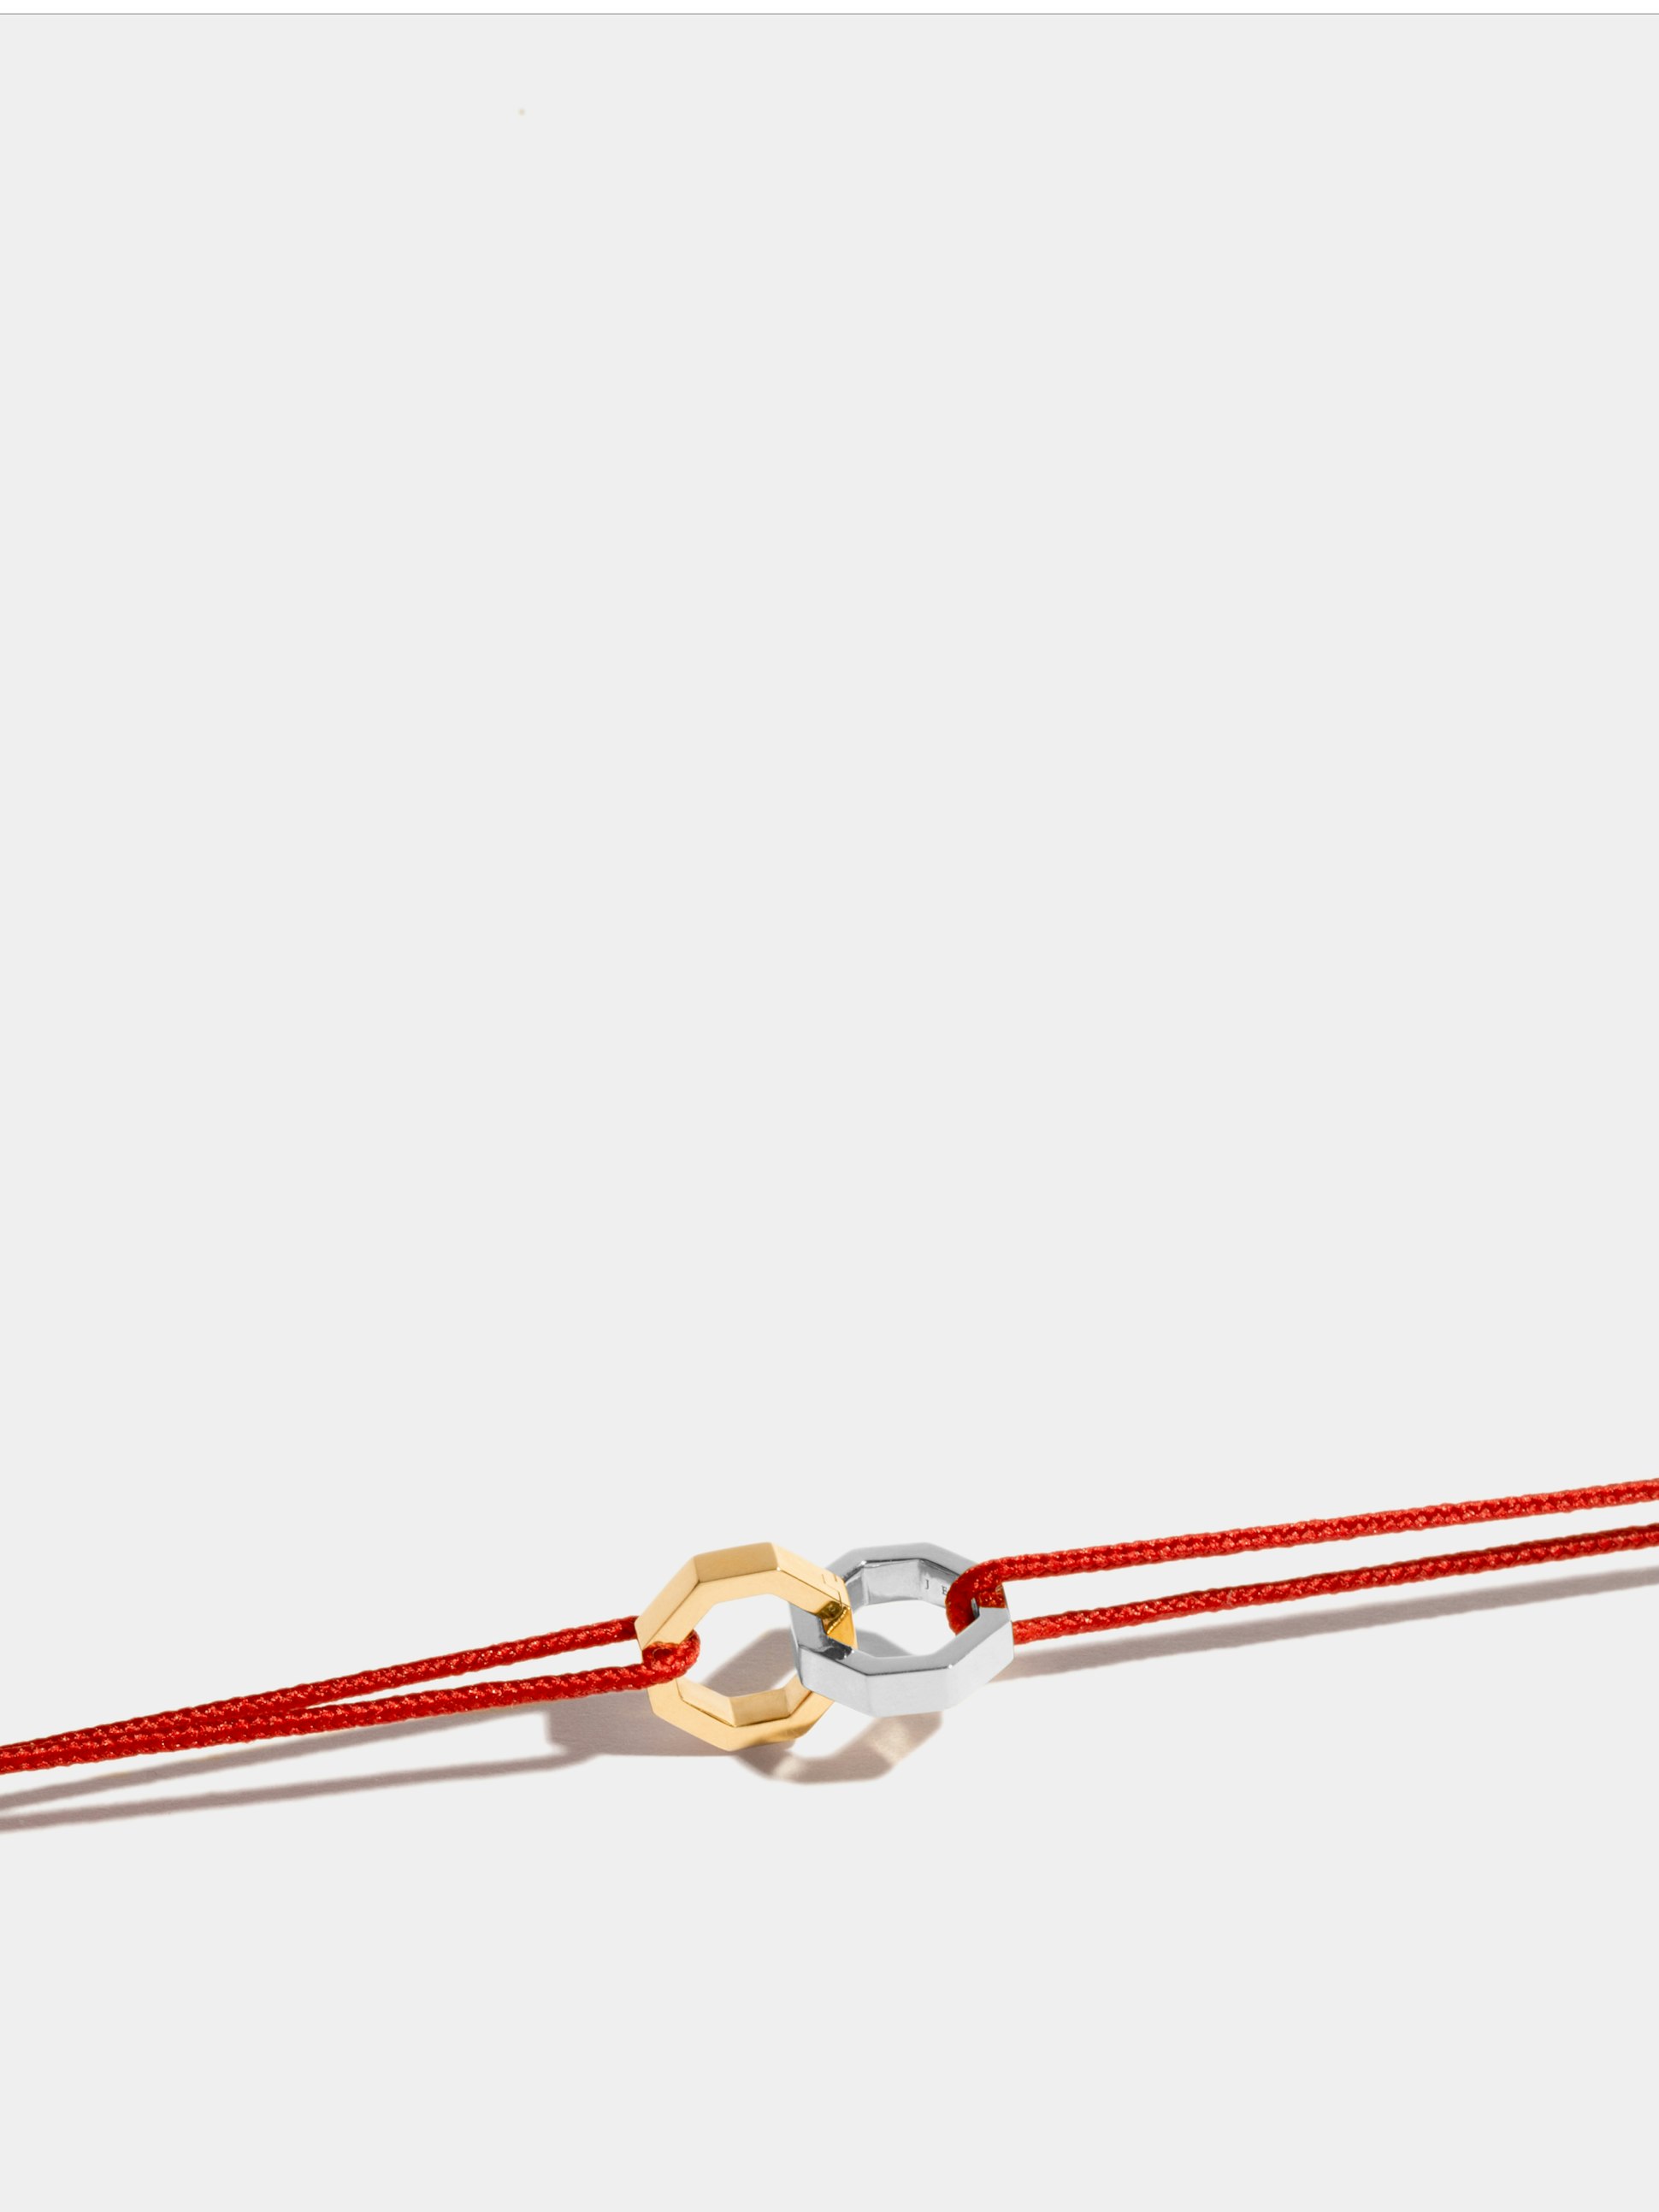 Double Octogone bracelet in 18k Fairmined ethical yellow et white gold, on a red cord. 